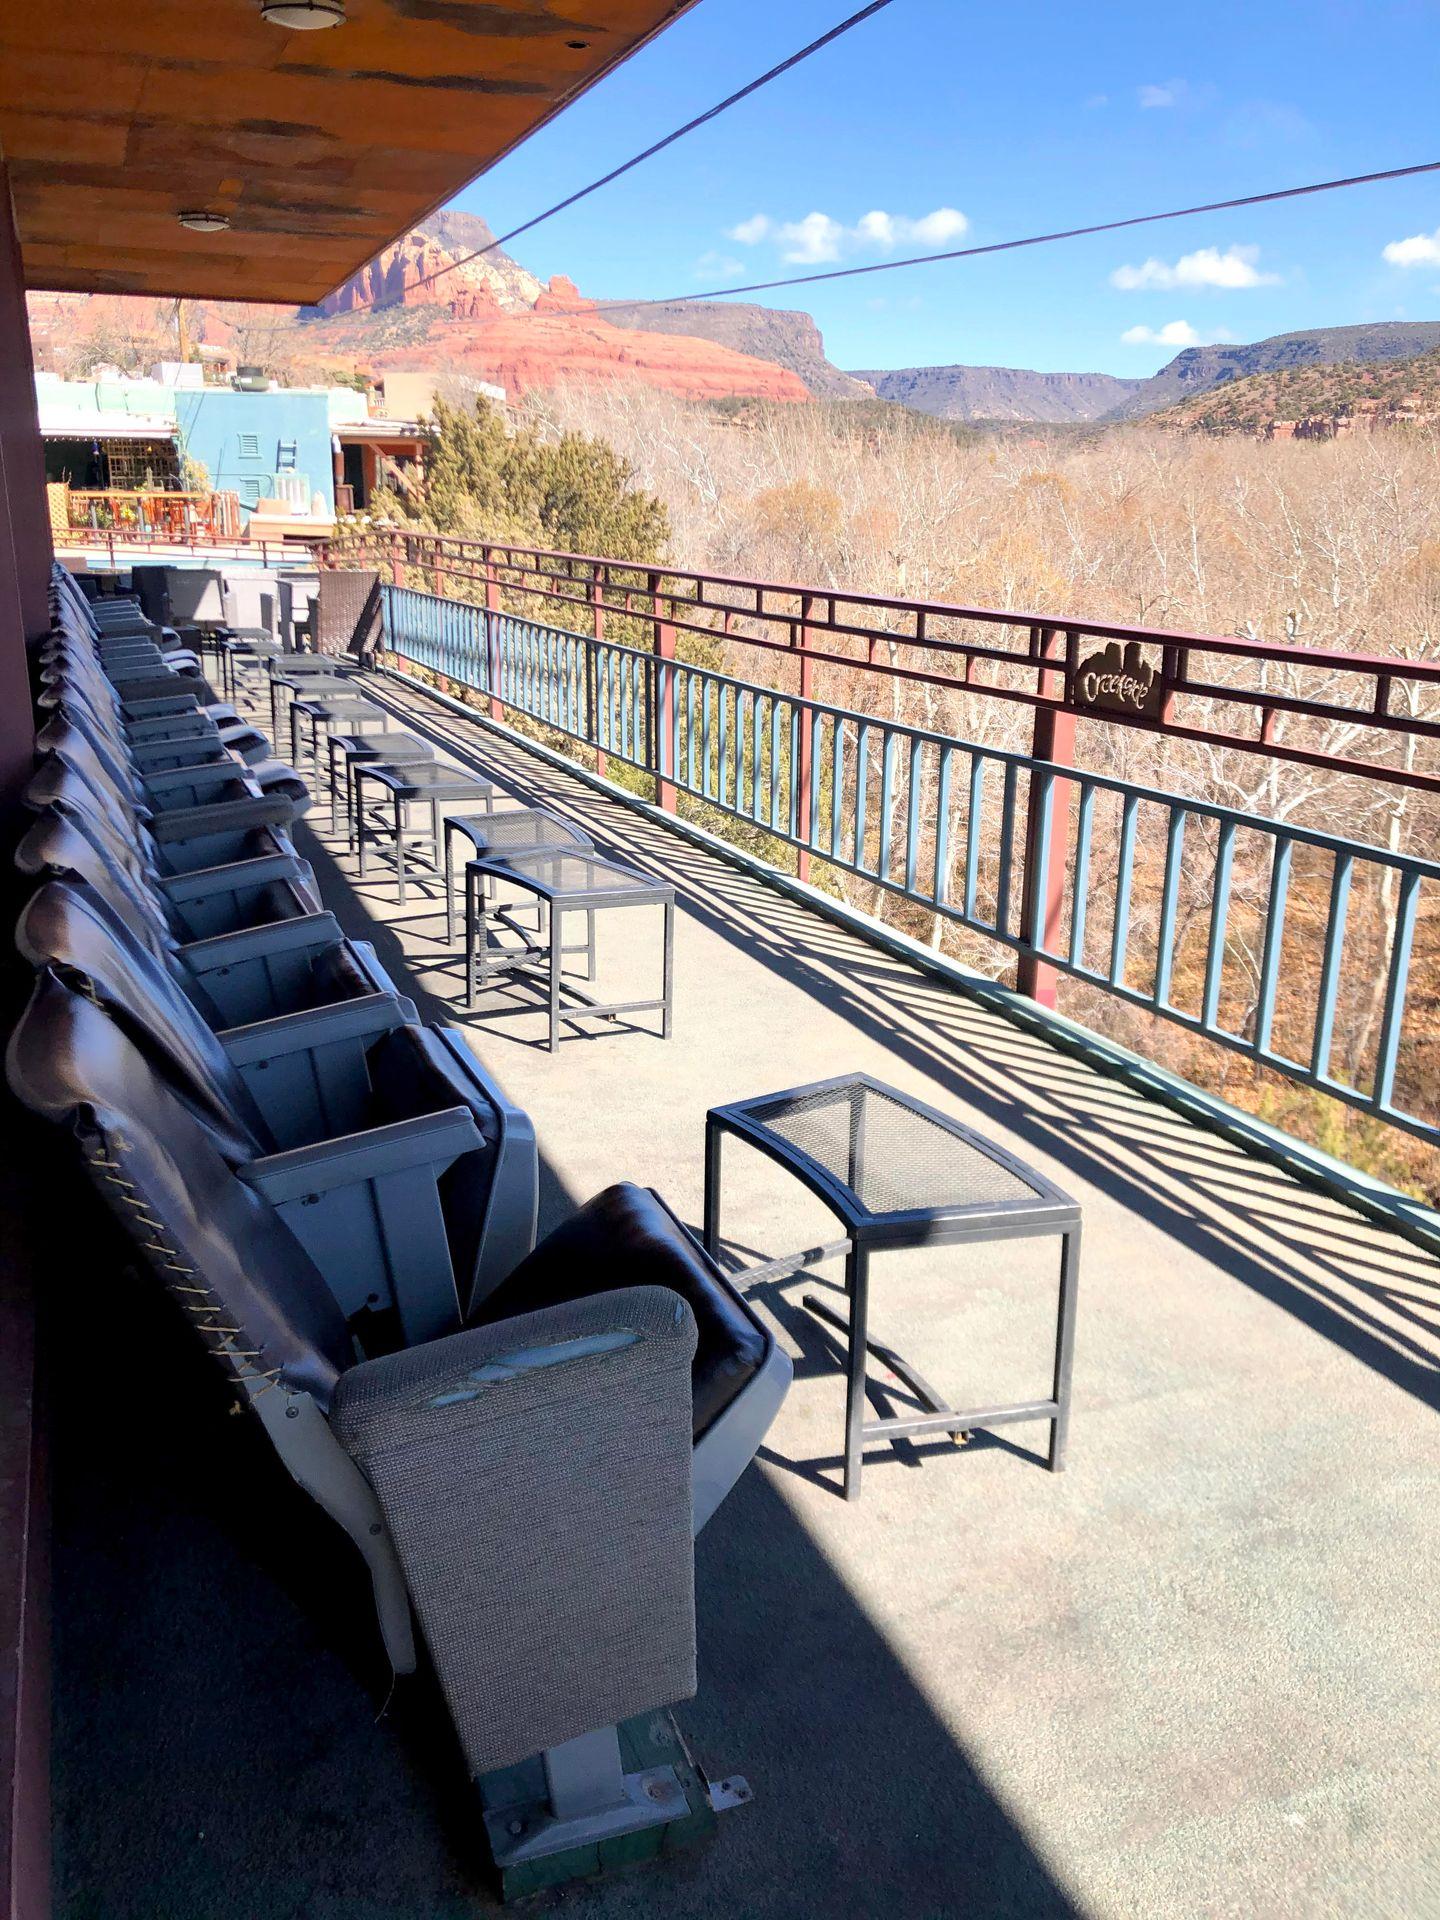 A row of seats facing out towards the view on the deck of Creekside Coffee.